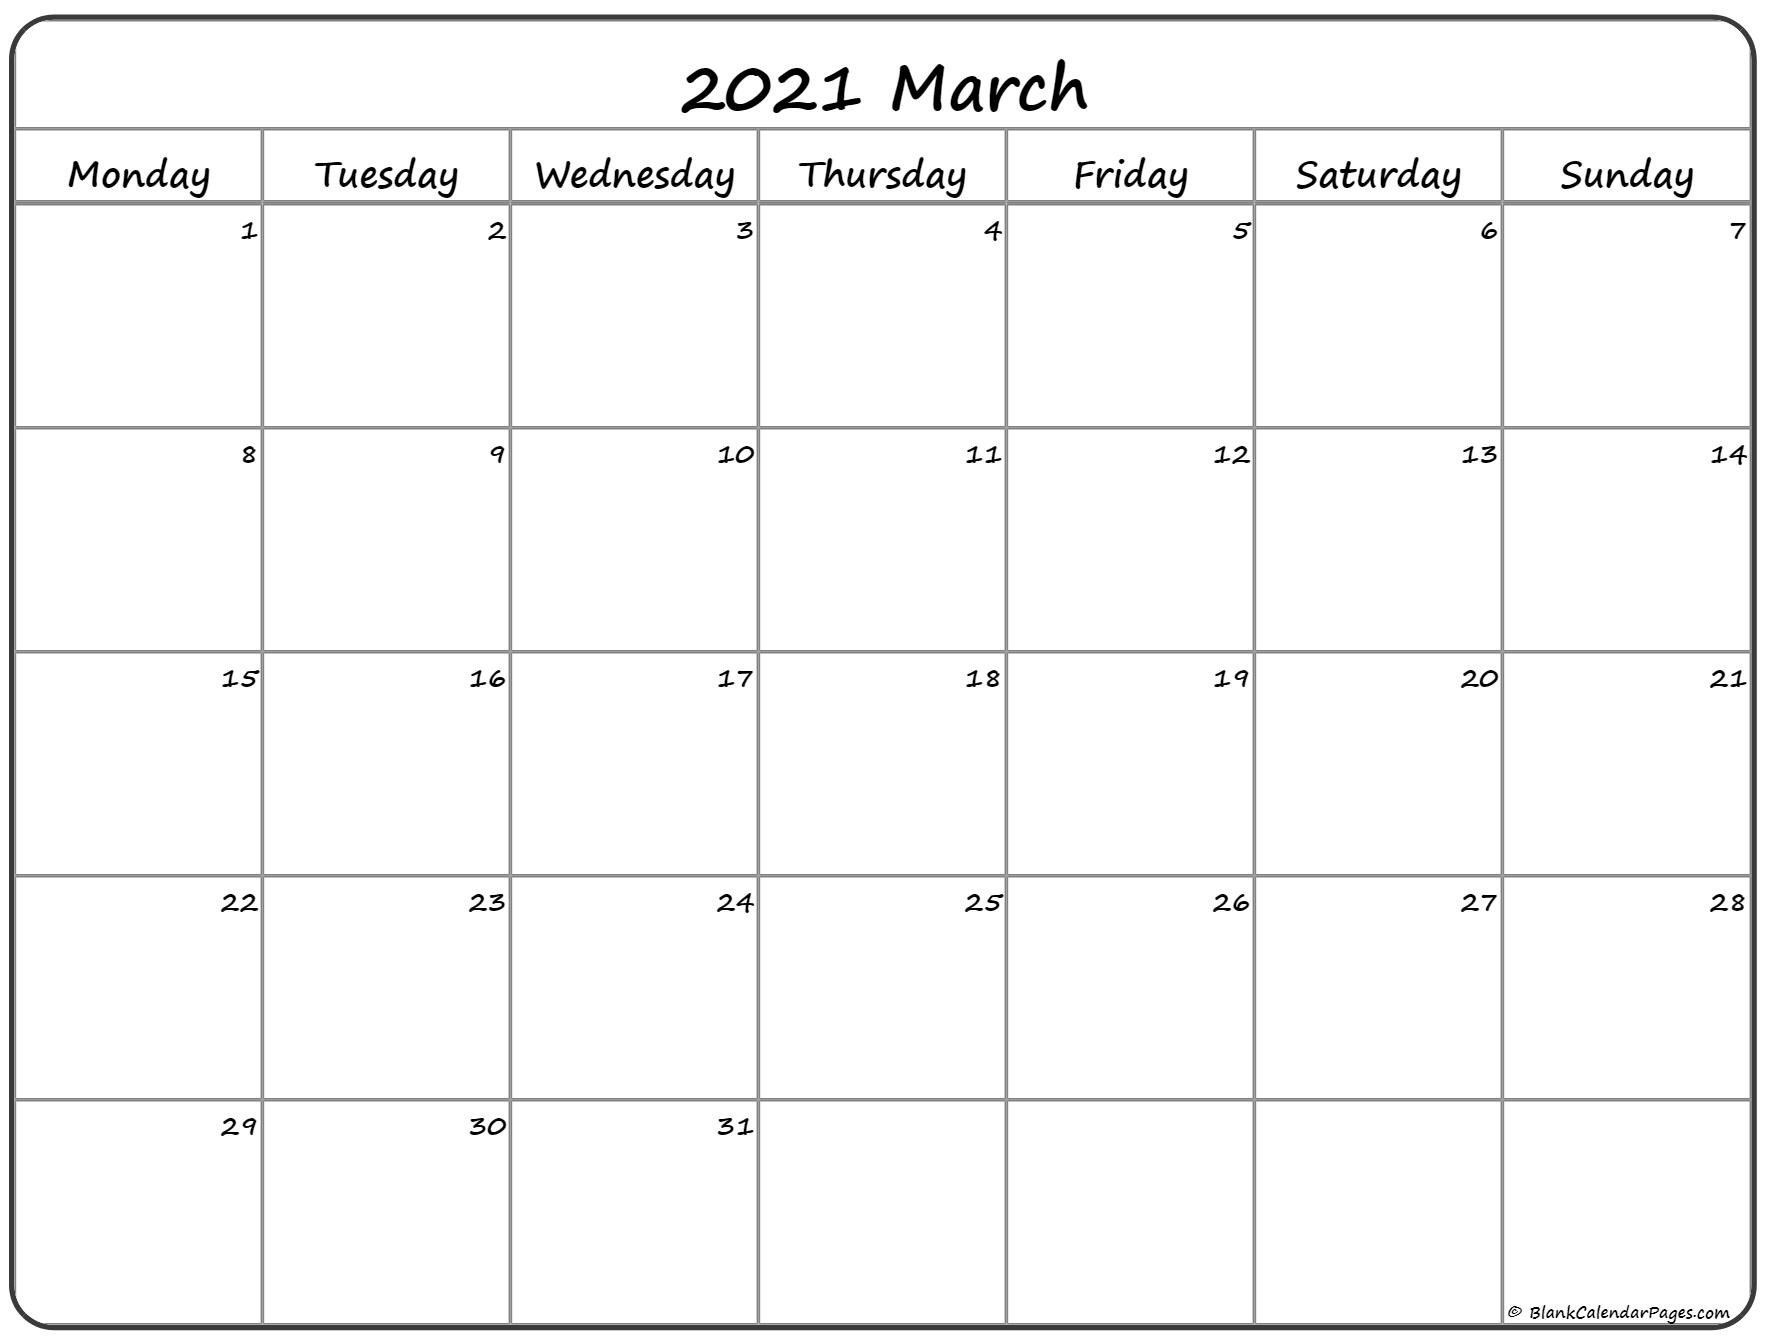 december 2020 to march 2021 calendar monday to friday